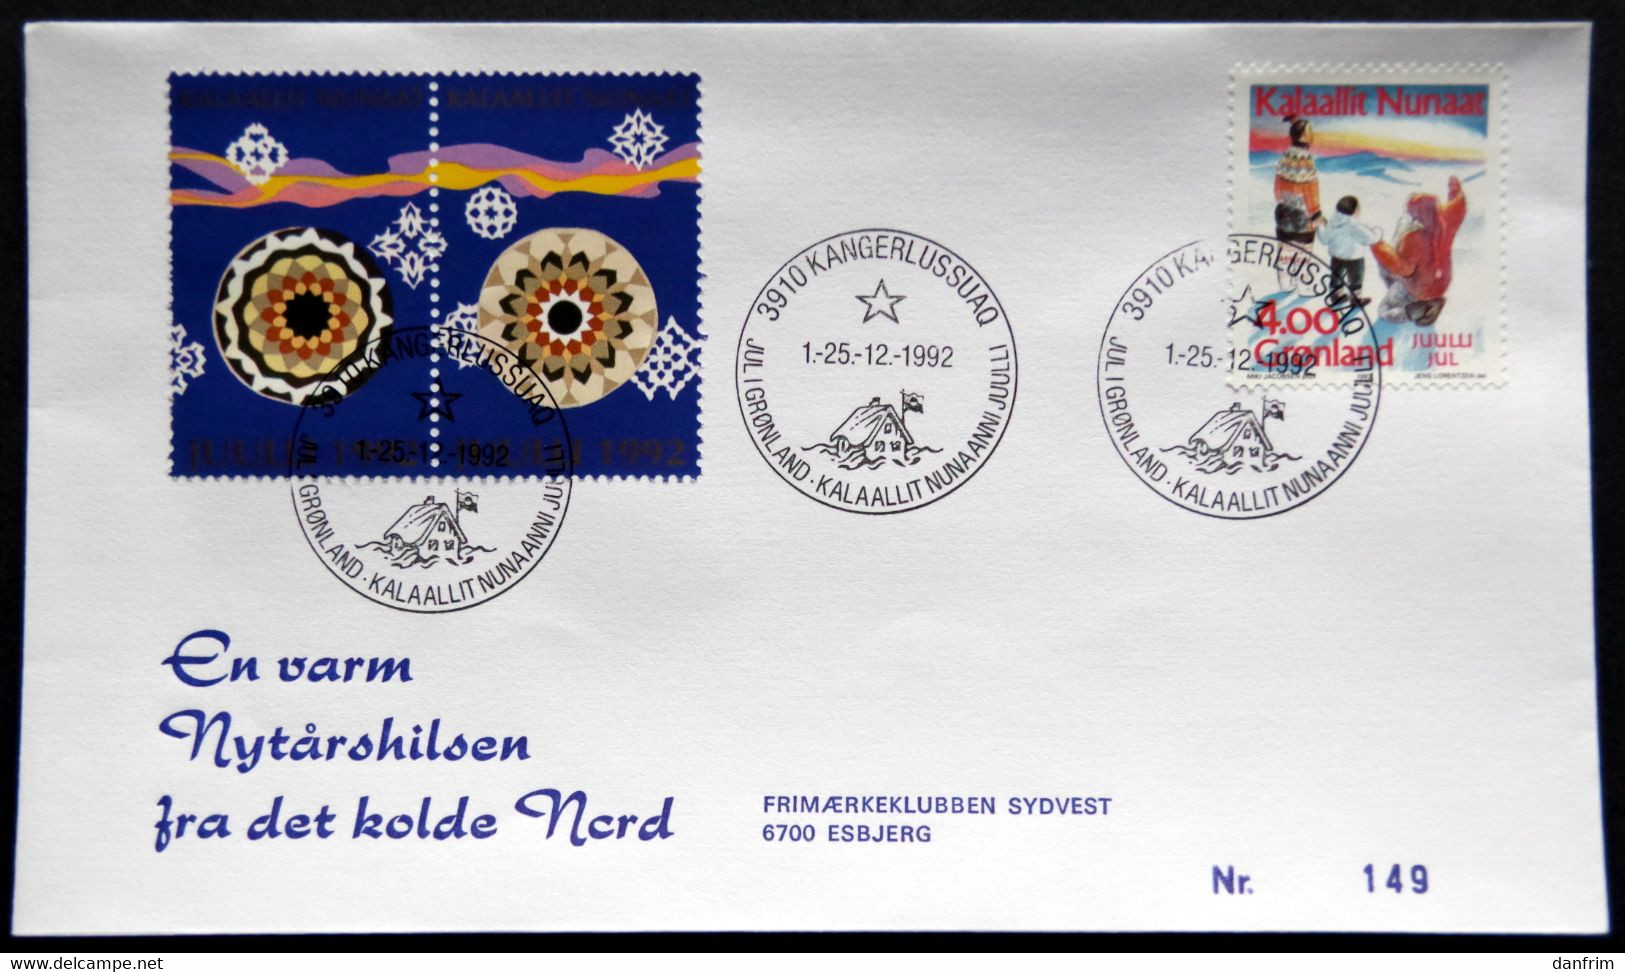 Greenland 1992 Cover  Minr.229  KANGERLUSSUA   (lot  806 ) - Covers & Documents